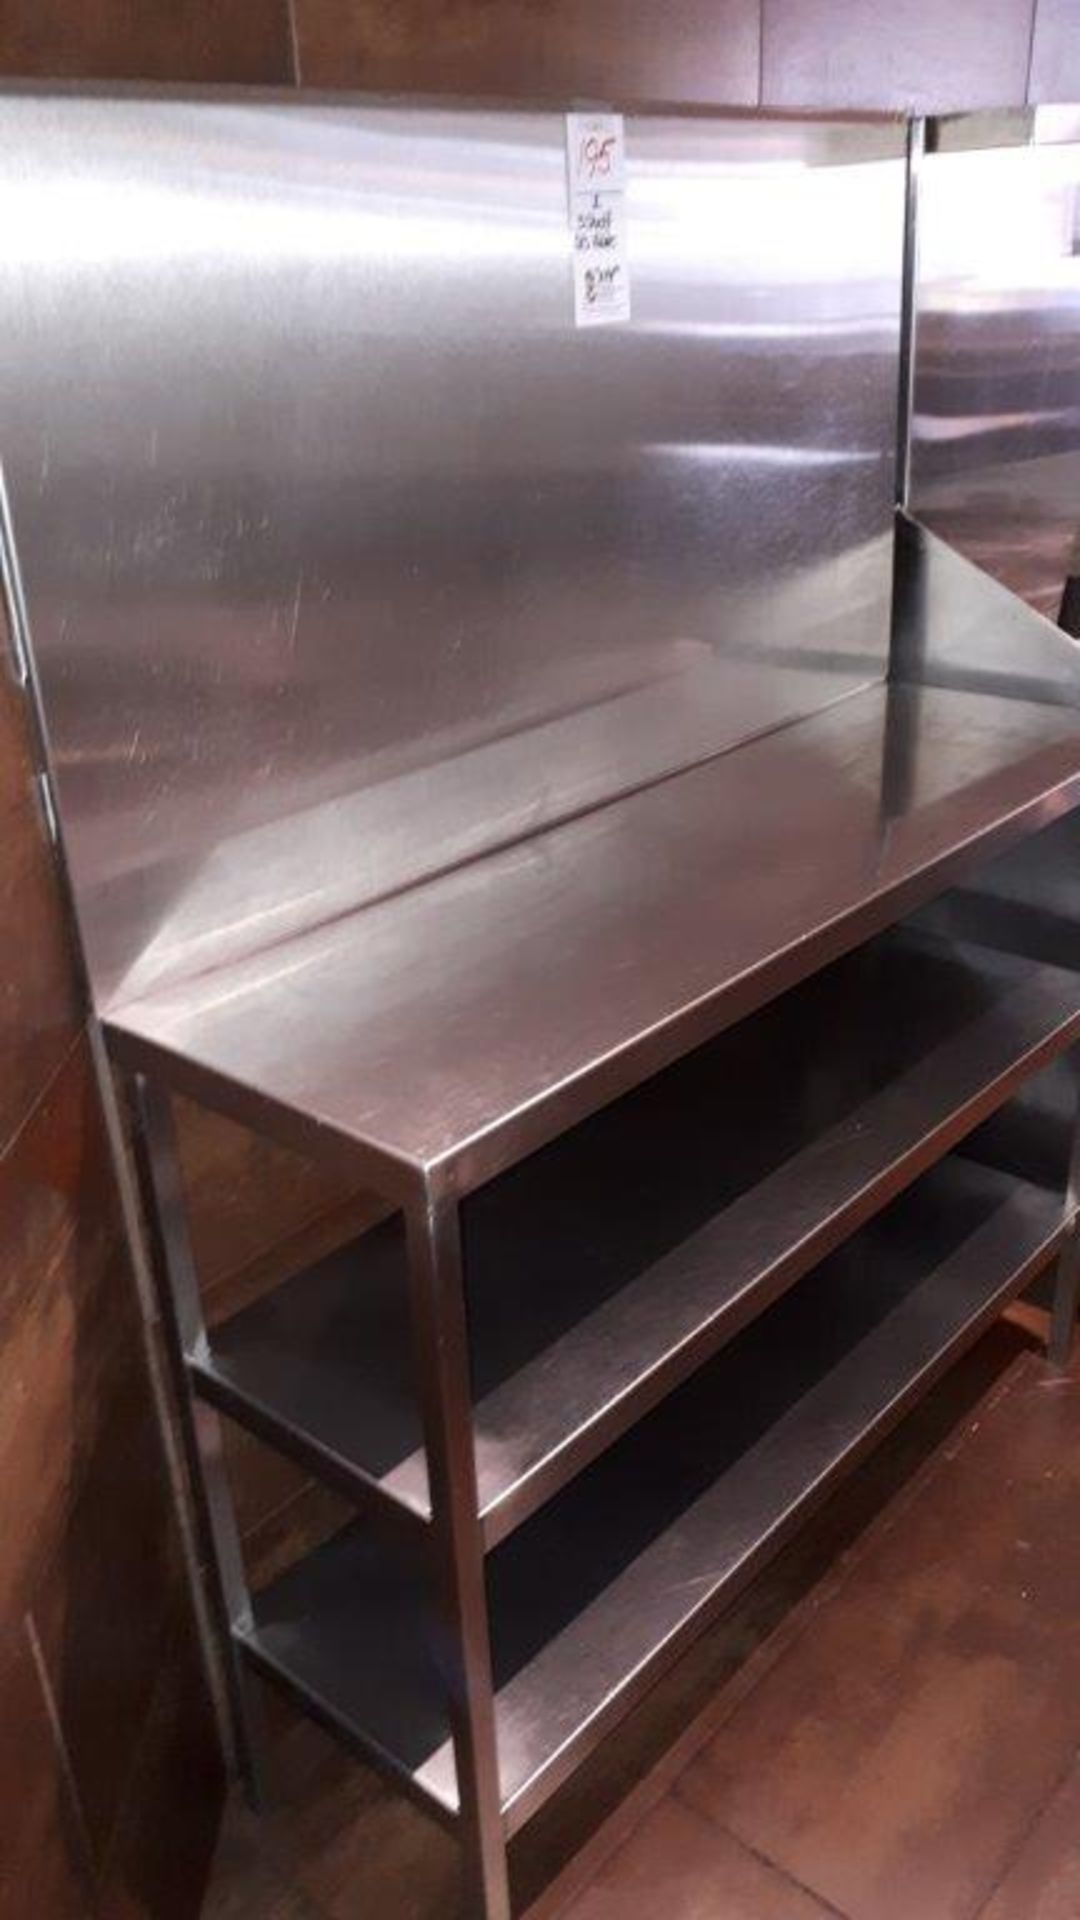 3-shelf Stainless steel table,46”x14”